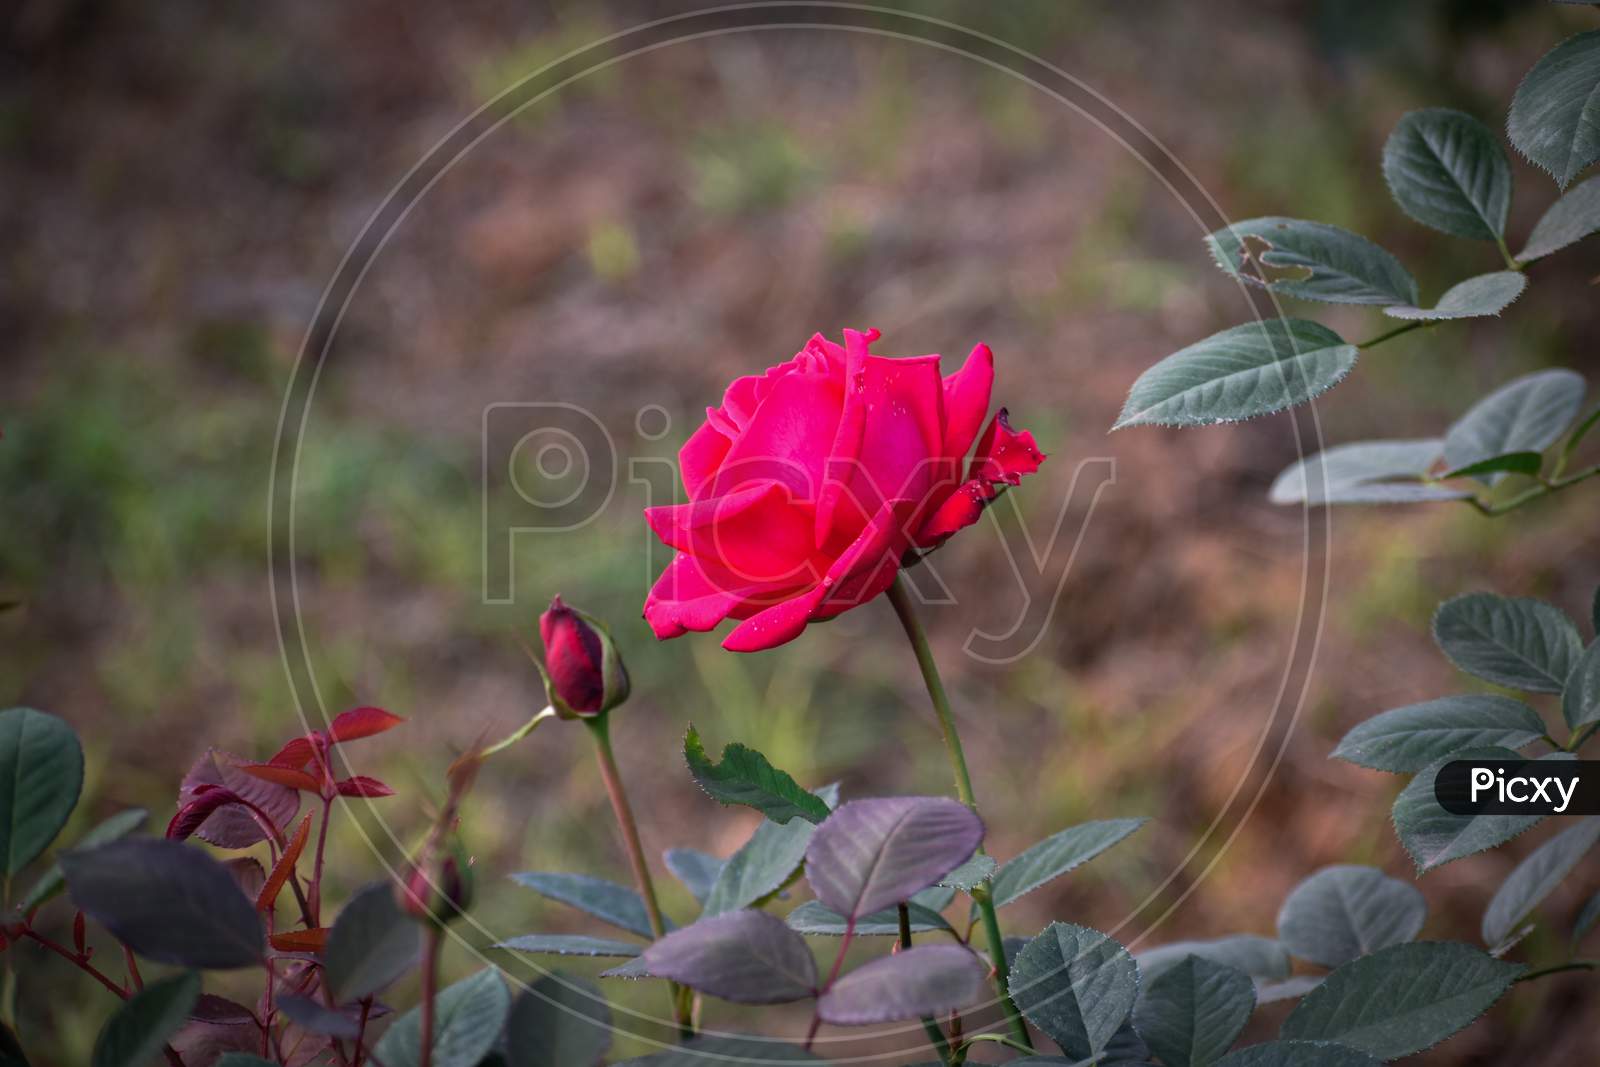 A Rose Is A Woody Perennial Flowering Plant Of The Genus Rosa, In The Family Rosaceae, Or The Flower It Bears